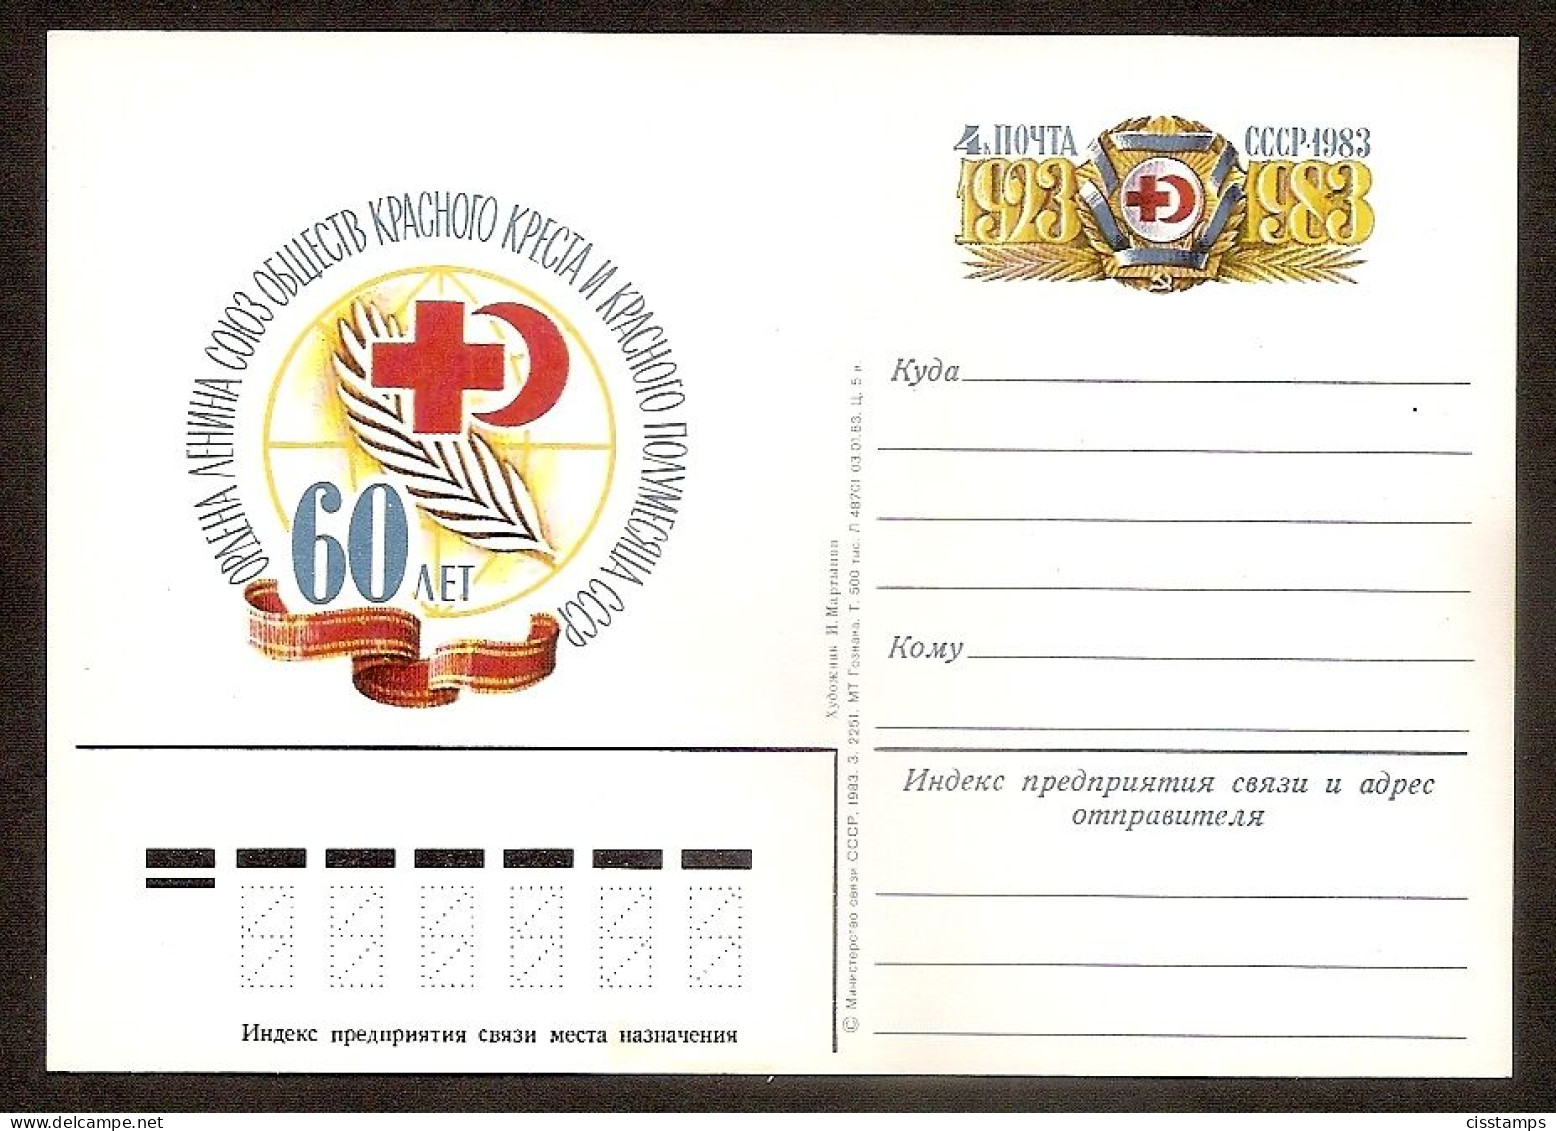 Russia USSR 1983●60th Anniv. Red Cross & Red Half-Moon●●stamped Stationery●postal Card●Mi PSo114 - 1980-91